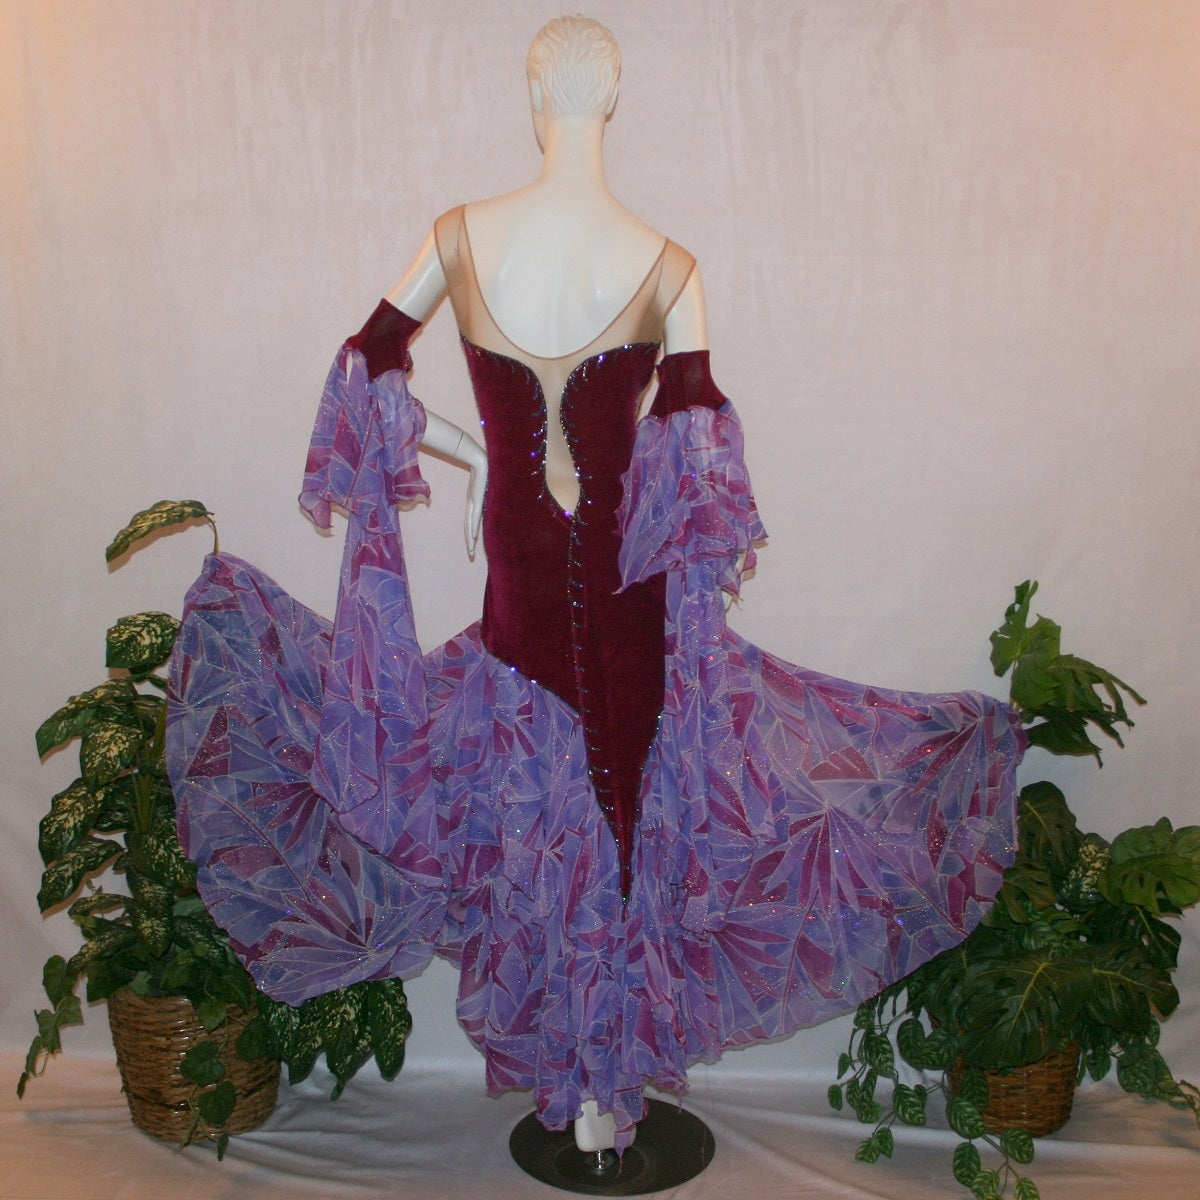 Crystal's Creations back view of Magenta converta ballroom dress created of magenta solid slinky on a nude illusion base with tropical chiffon print skirtings of magenta & orchids, is embellished with tanzanite & orchid rhinestone work.